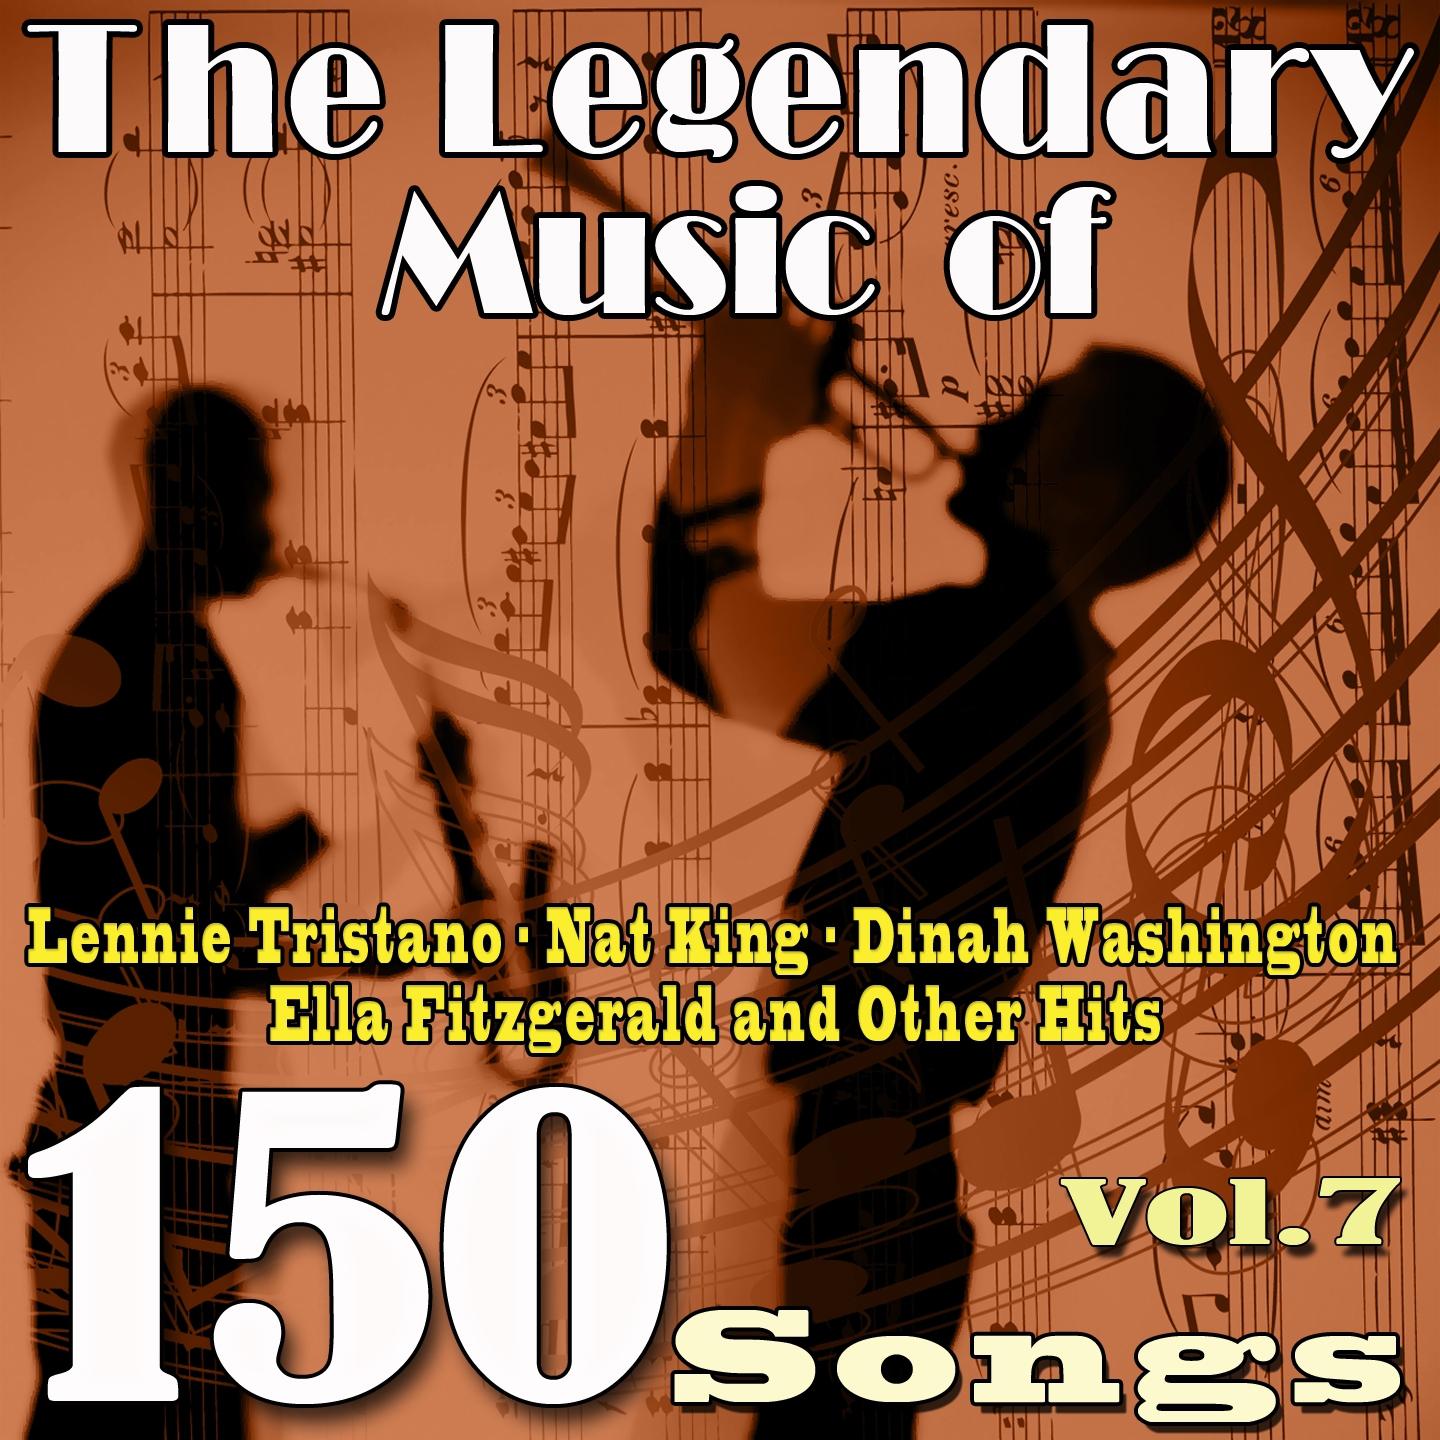 Постер альбома The Legendary Music of Lennie Tristano, Nat King, Dinah Washington, Ella Fitzgerald and Other Hits, Vol. 7